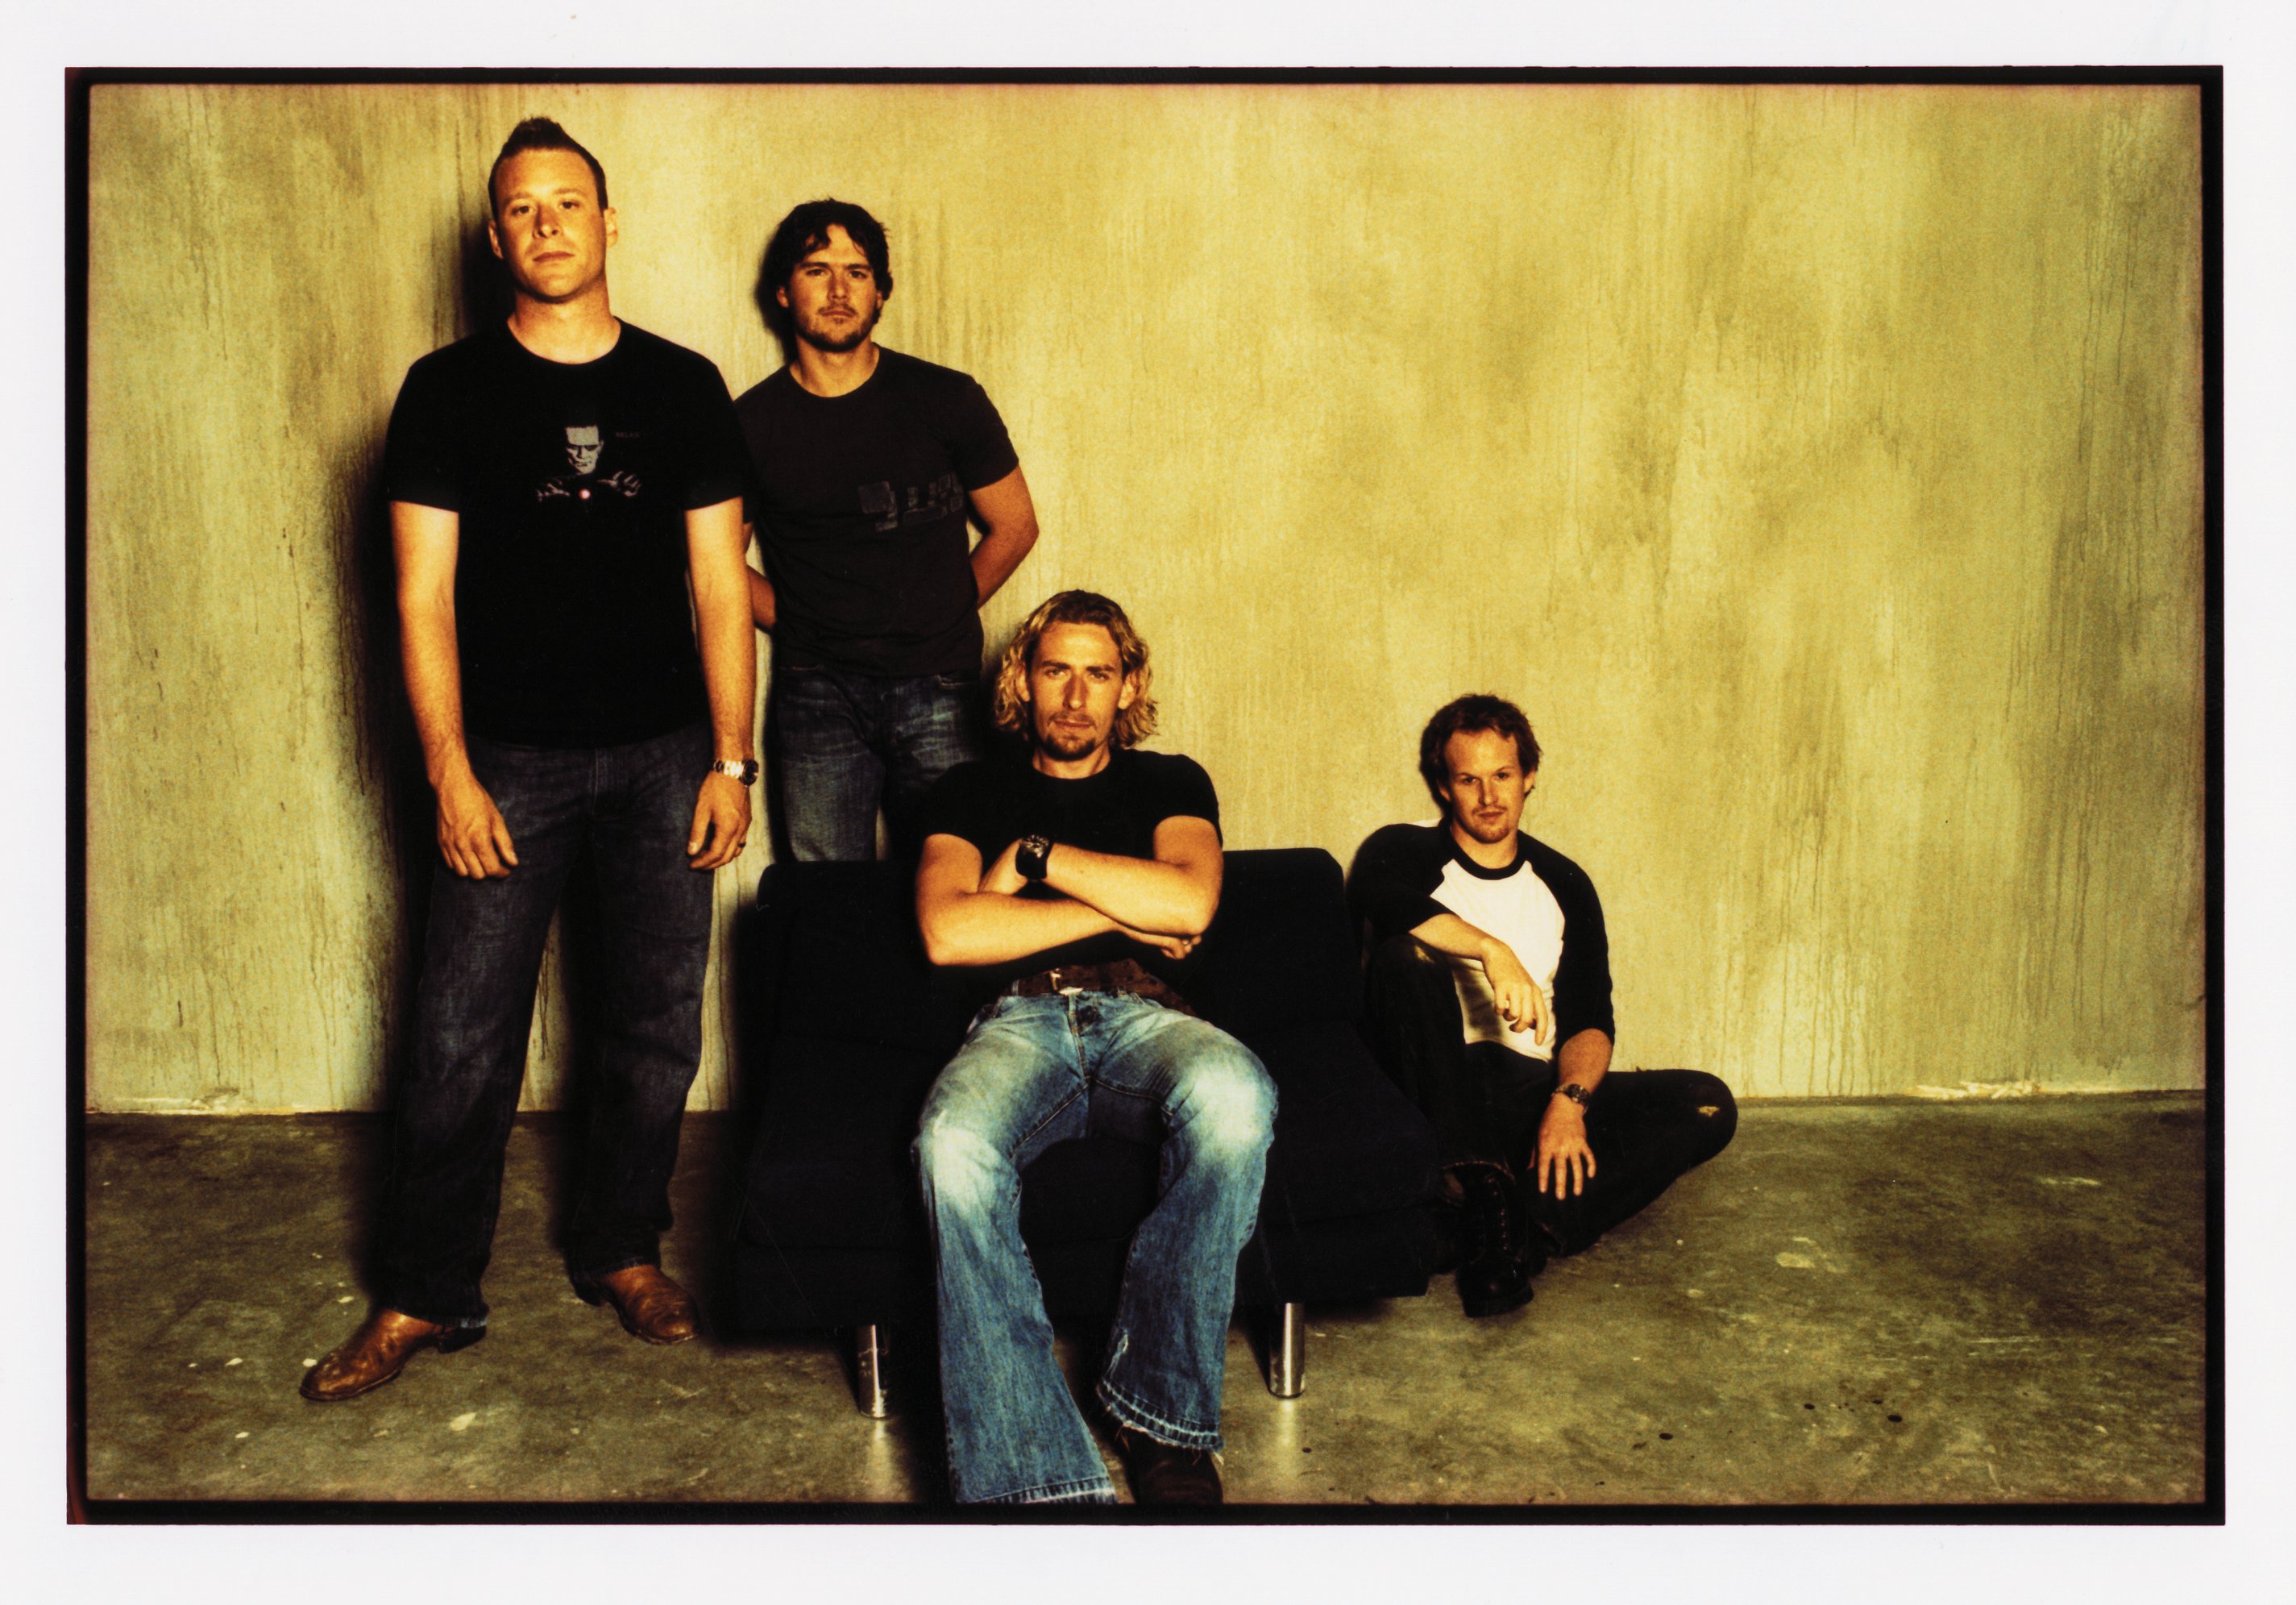 Nickelback photoshot wallpapers and images - wallpapers, pictures, photos